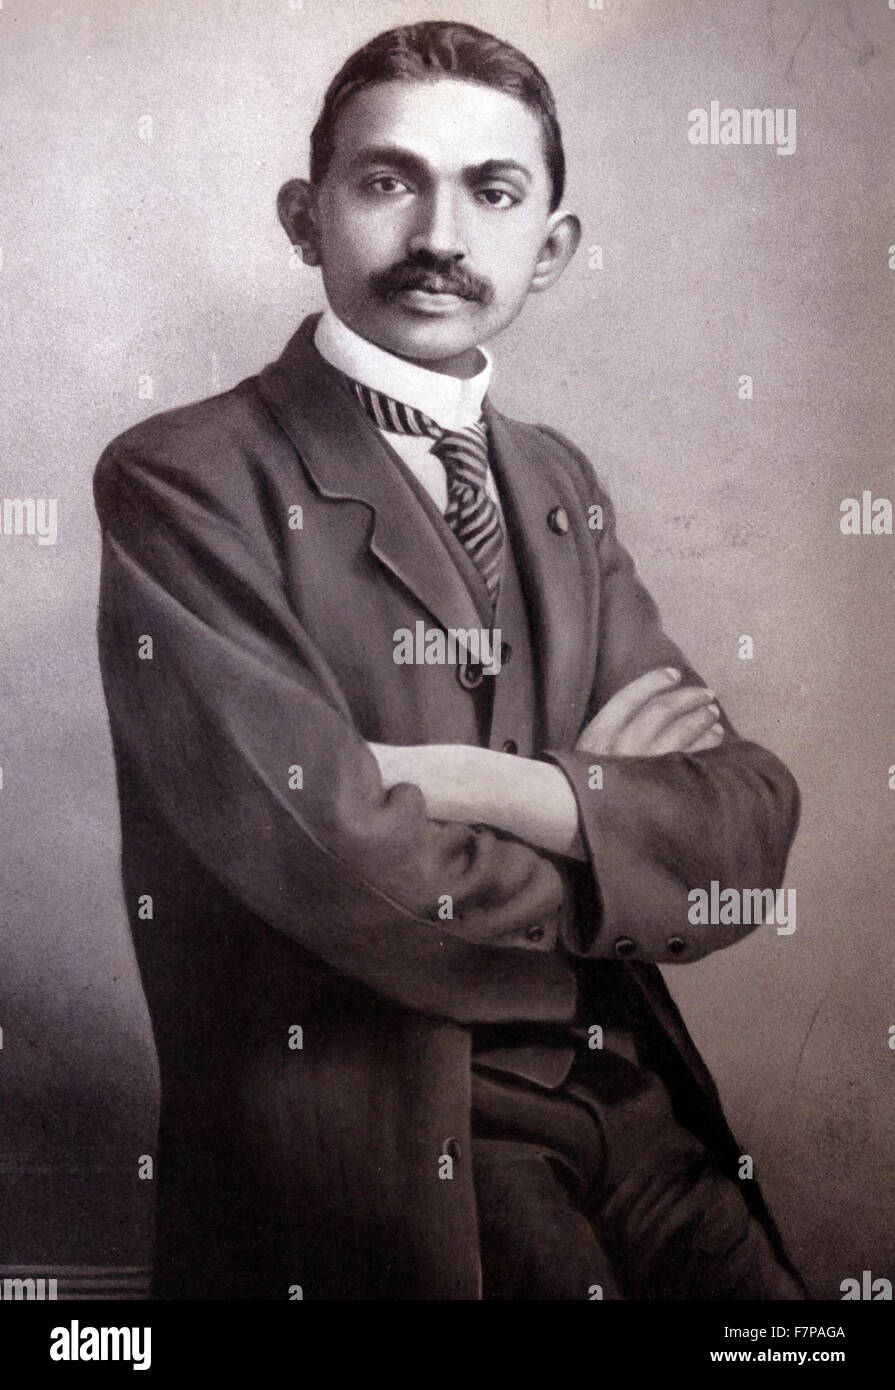 Mahatma Gandhi as a lawyer in South Africa circa 1905. Mohandas Karamchand Gandhi (1869 – 1948), was the preeminent leader of the Indian independence movement in British-ruled India. Employing nonviolent civil disobedience, Gandhi led India to independence and inspired movements for civil rights and freedom across the world. Stock Photo